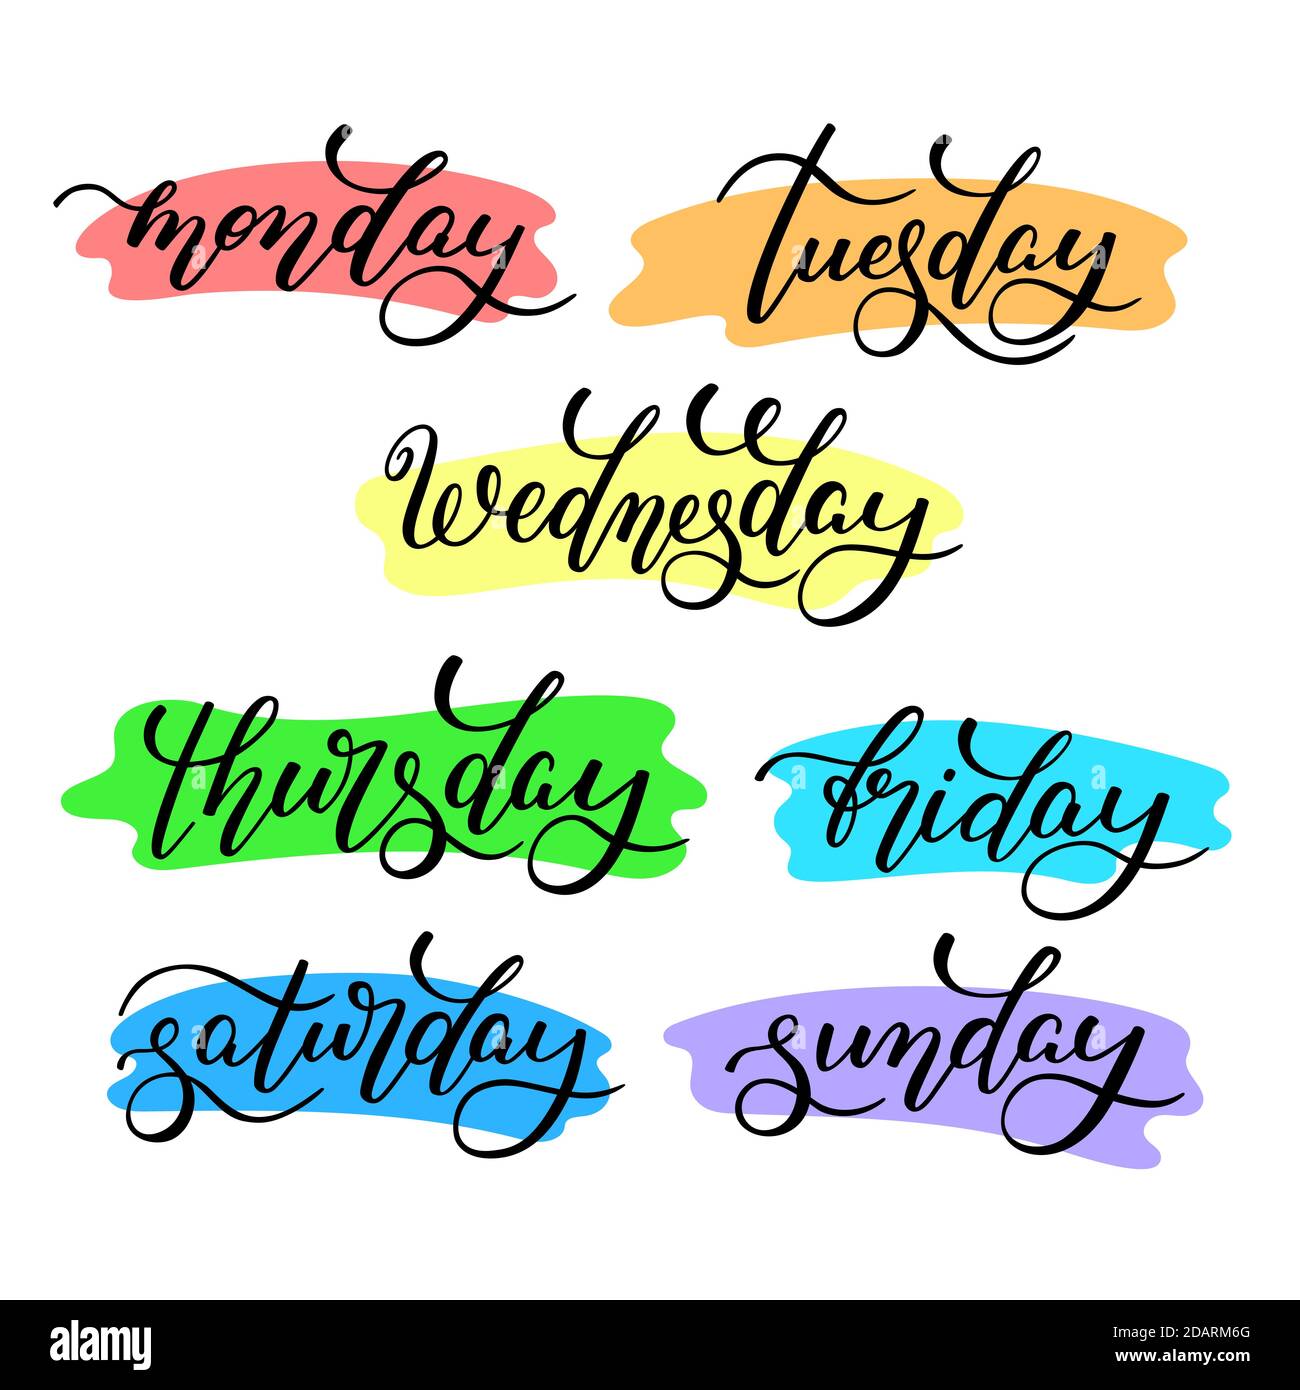 Word martes tuesday in spanish decorative Vector Image